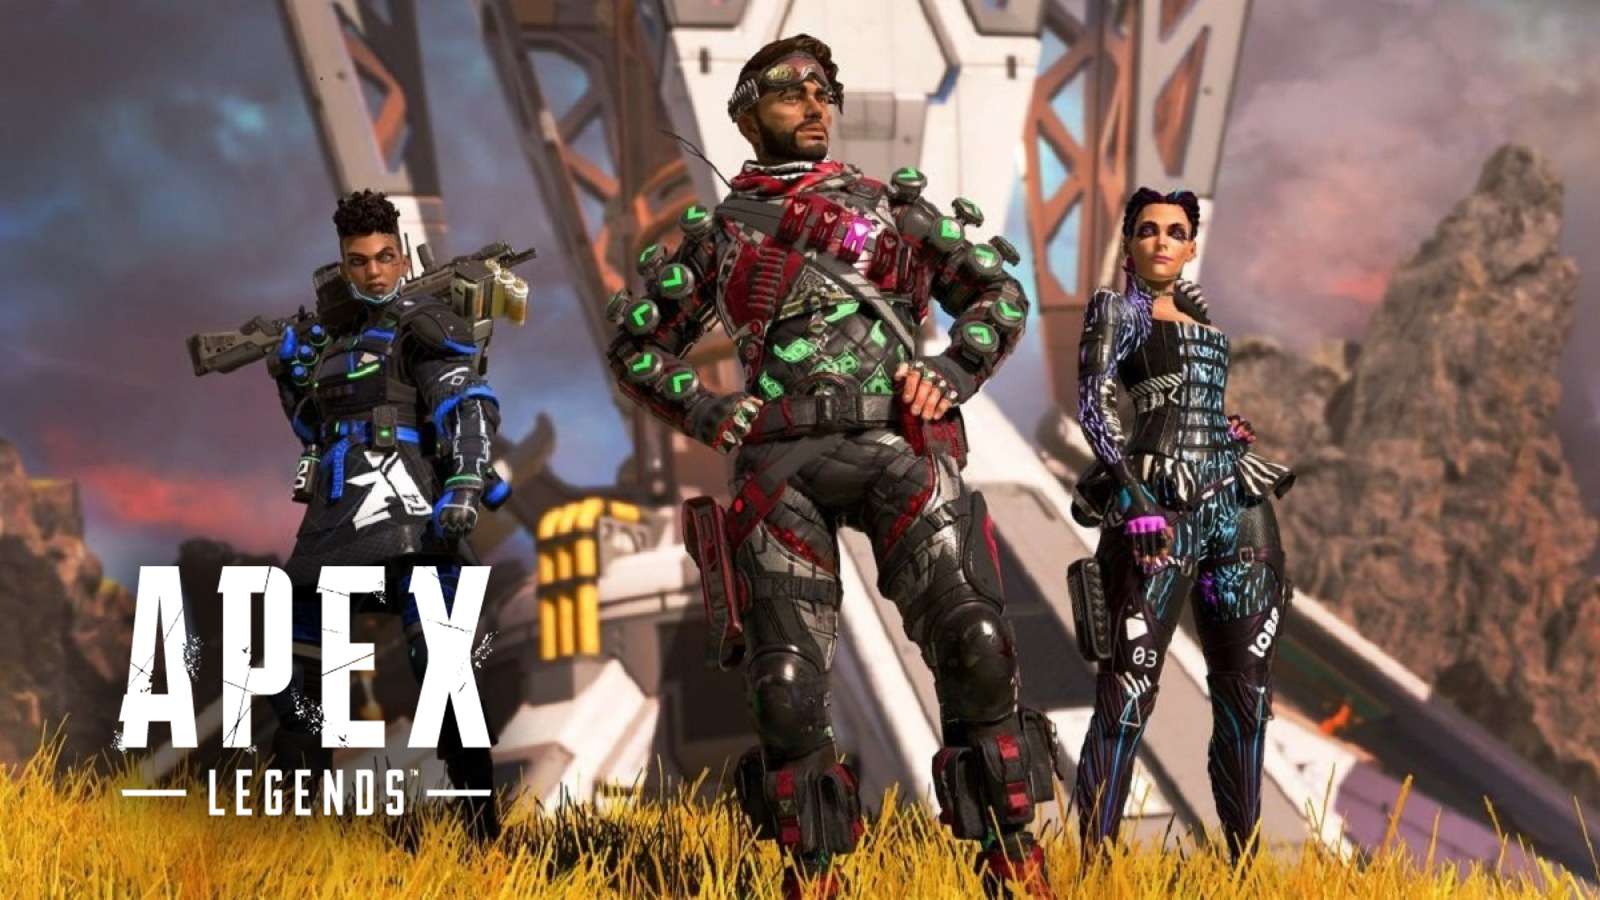 Bangalore, Mirage, and Loba in Apex Legends